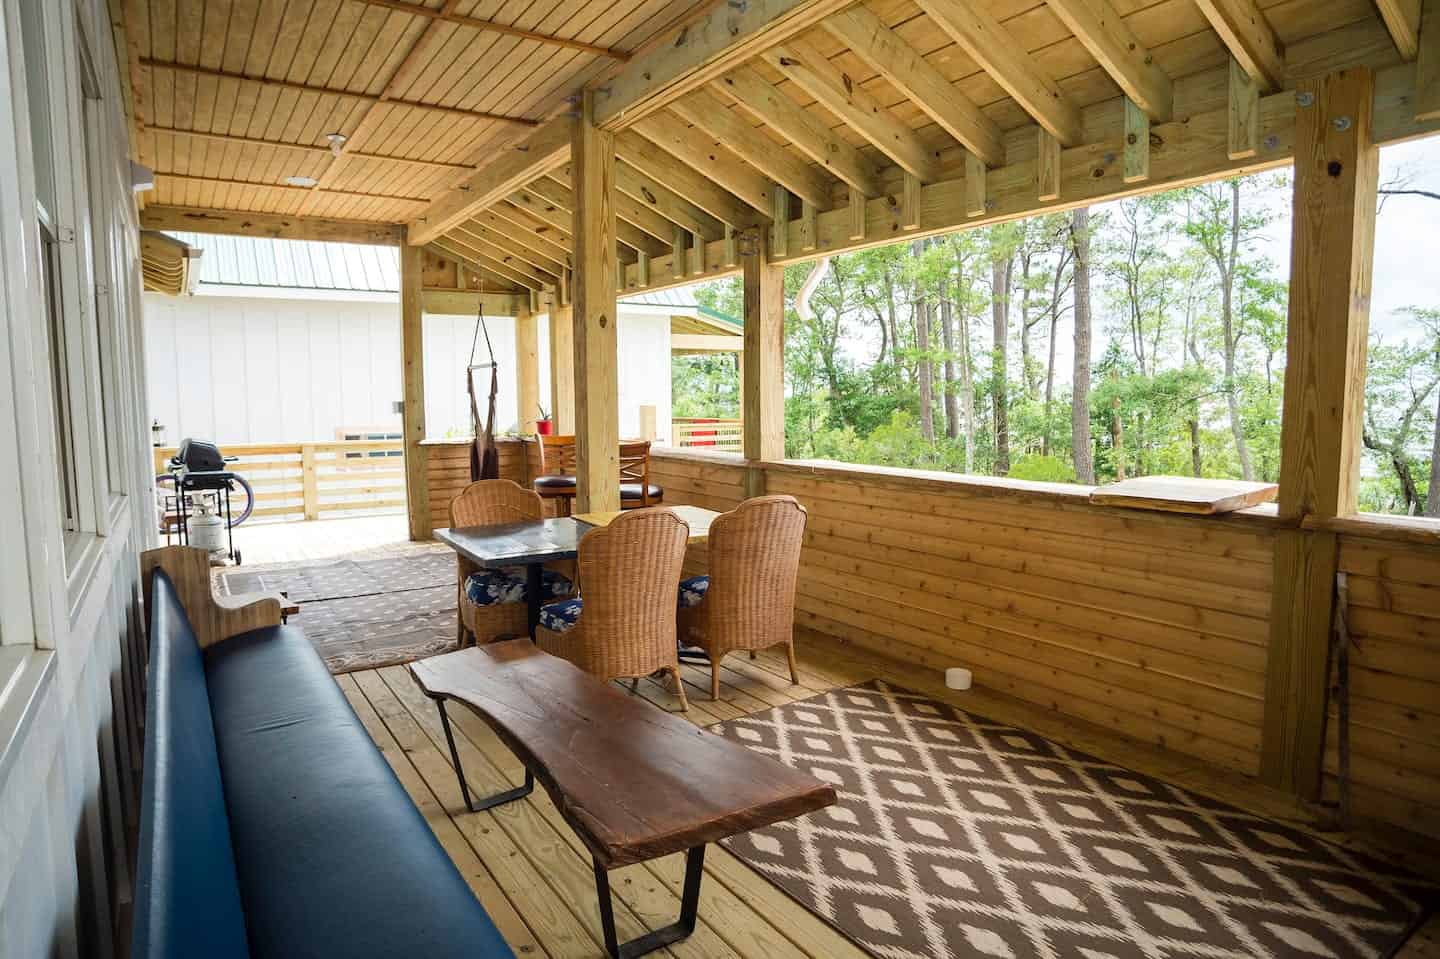 Image of Airbnb rental in Outer Banks, North Carolina